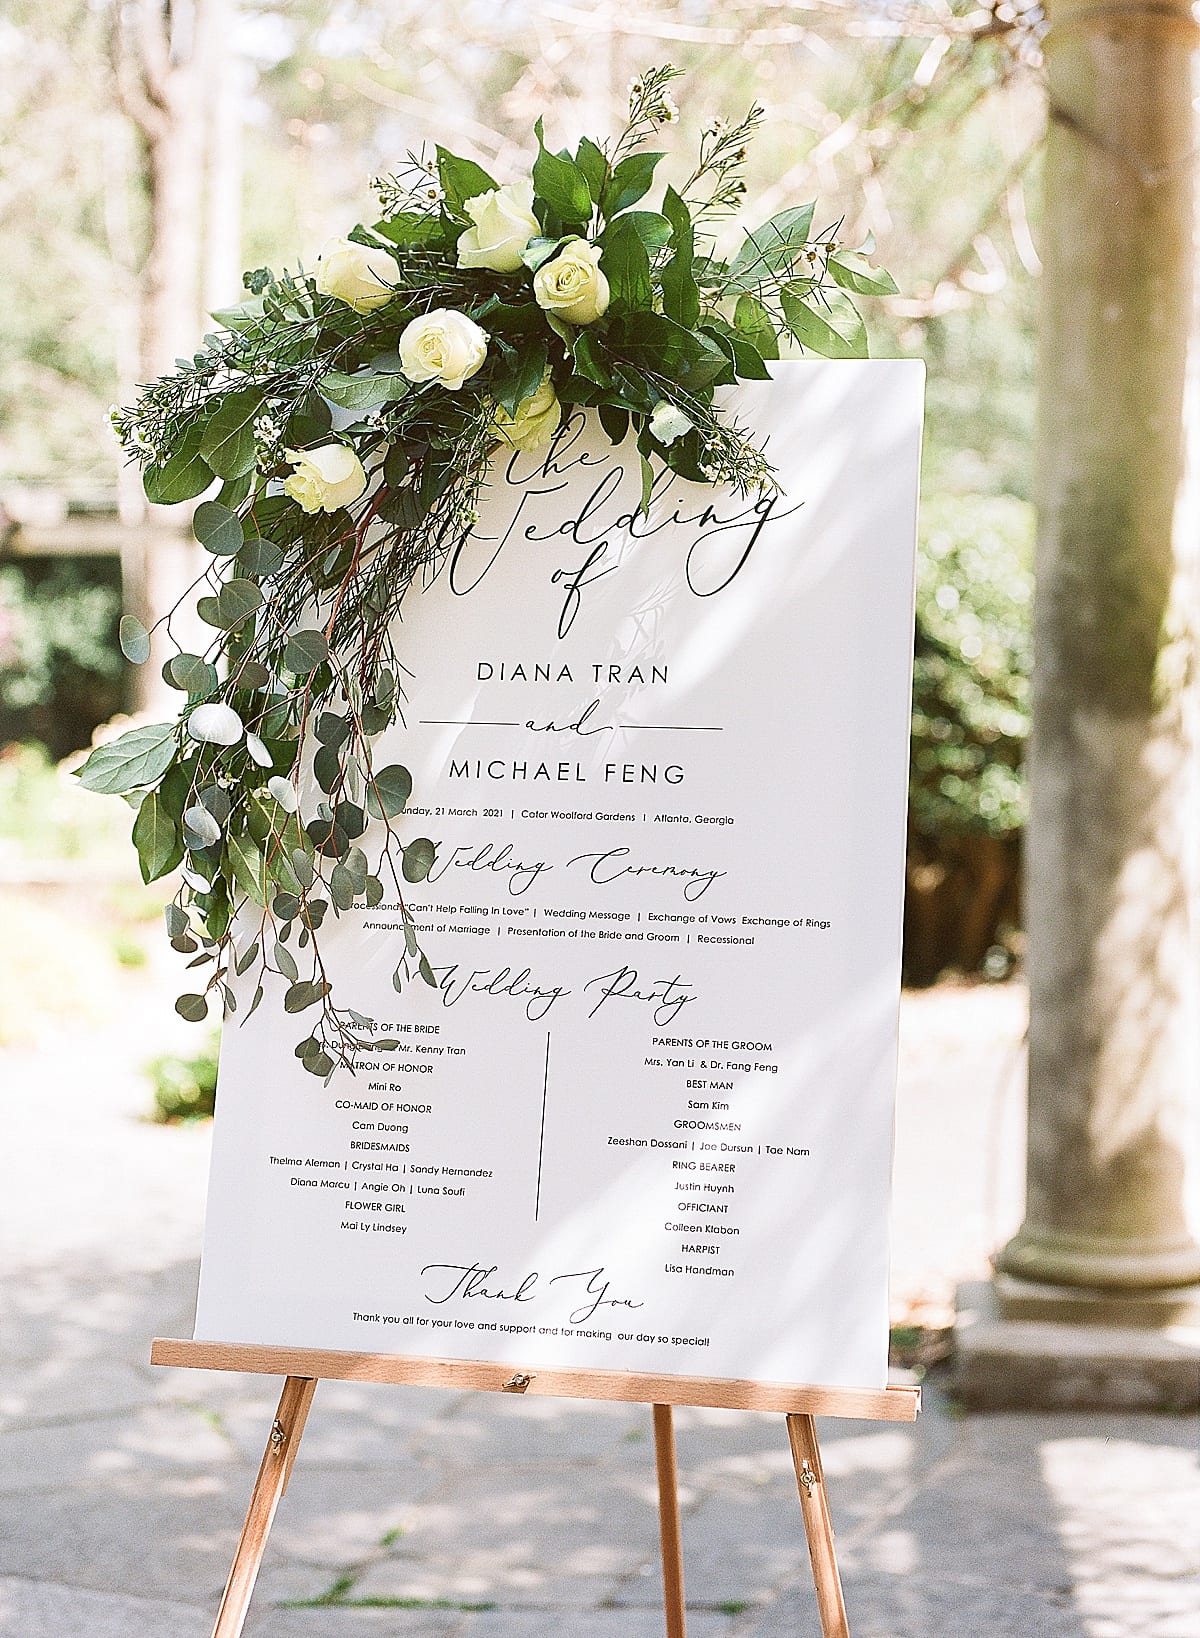 Cator Woolford Gardens Wedding Welcome Sign Photo